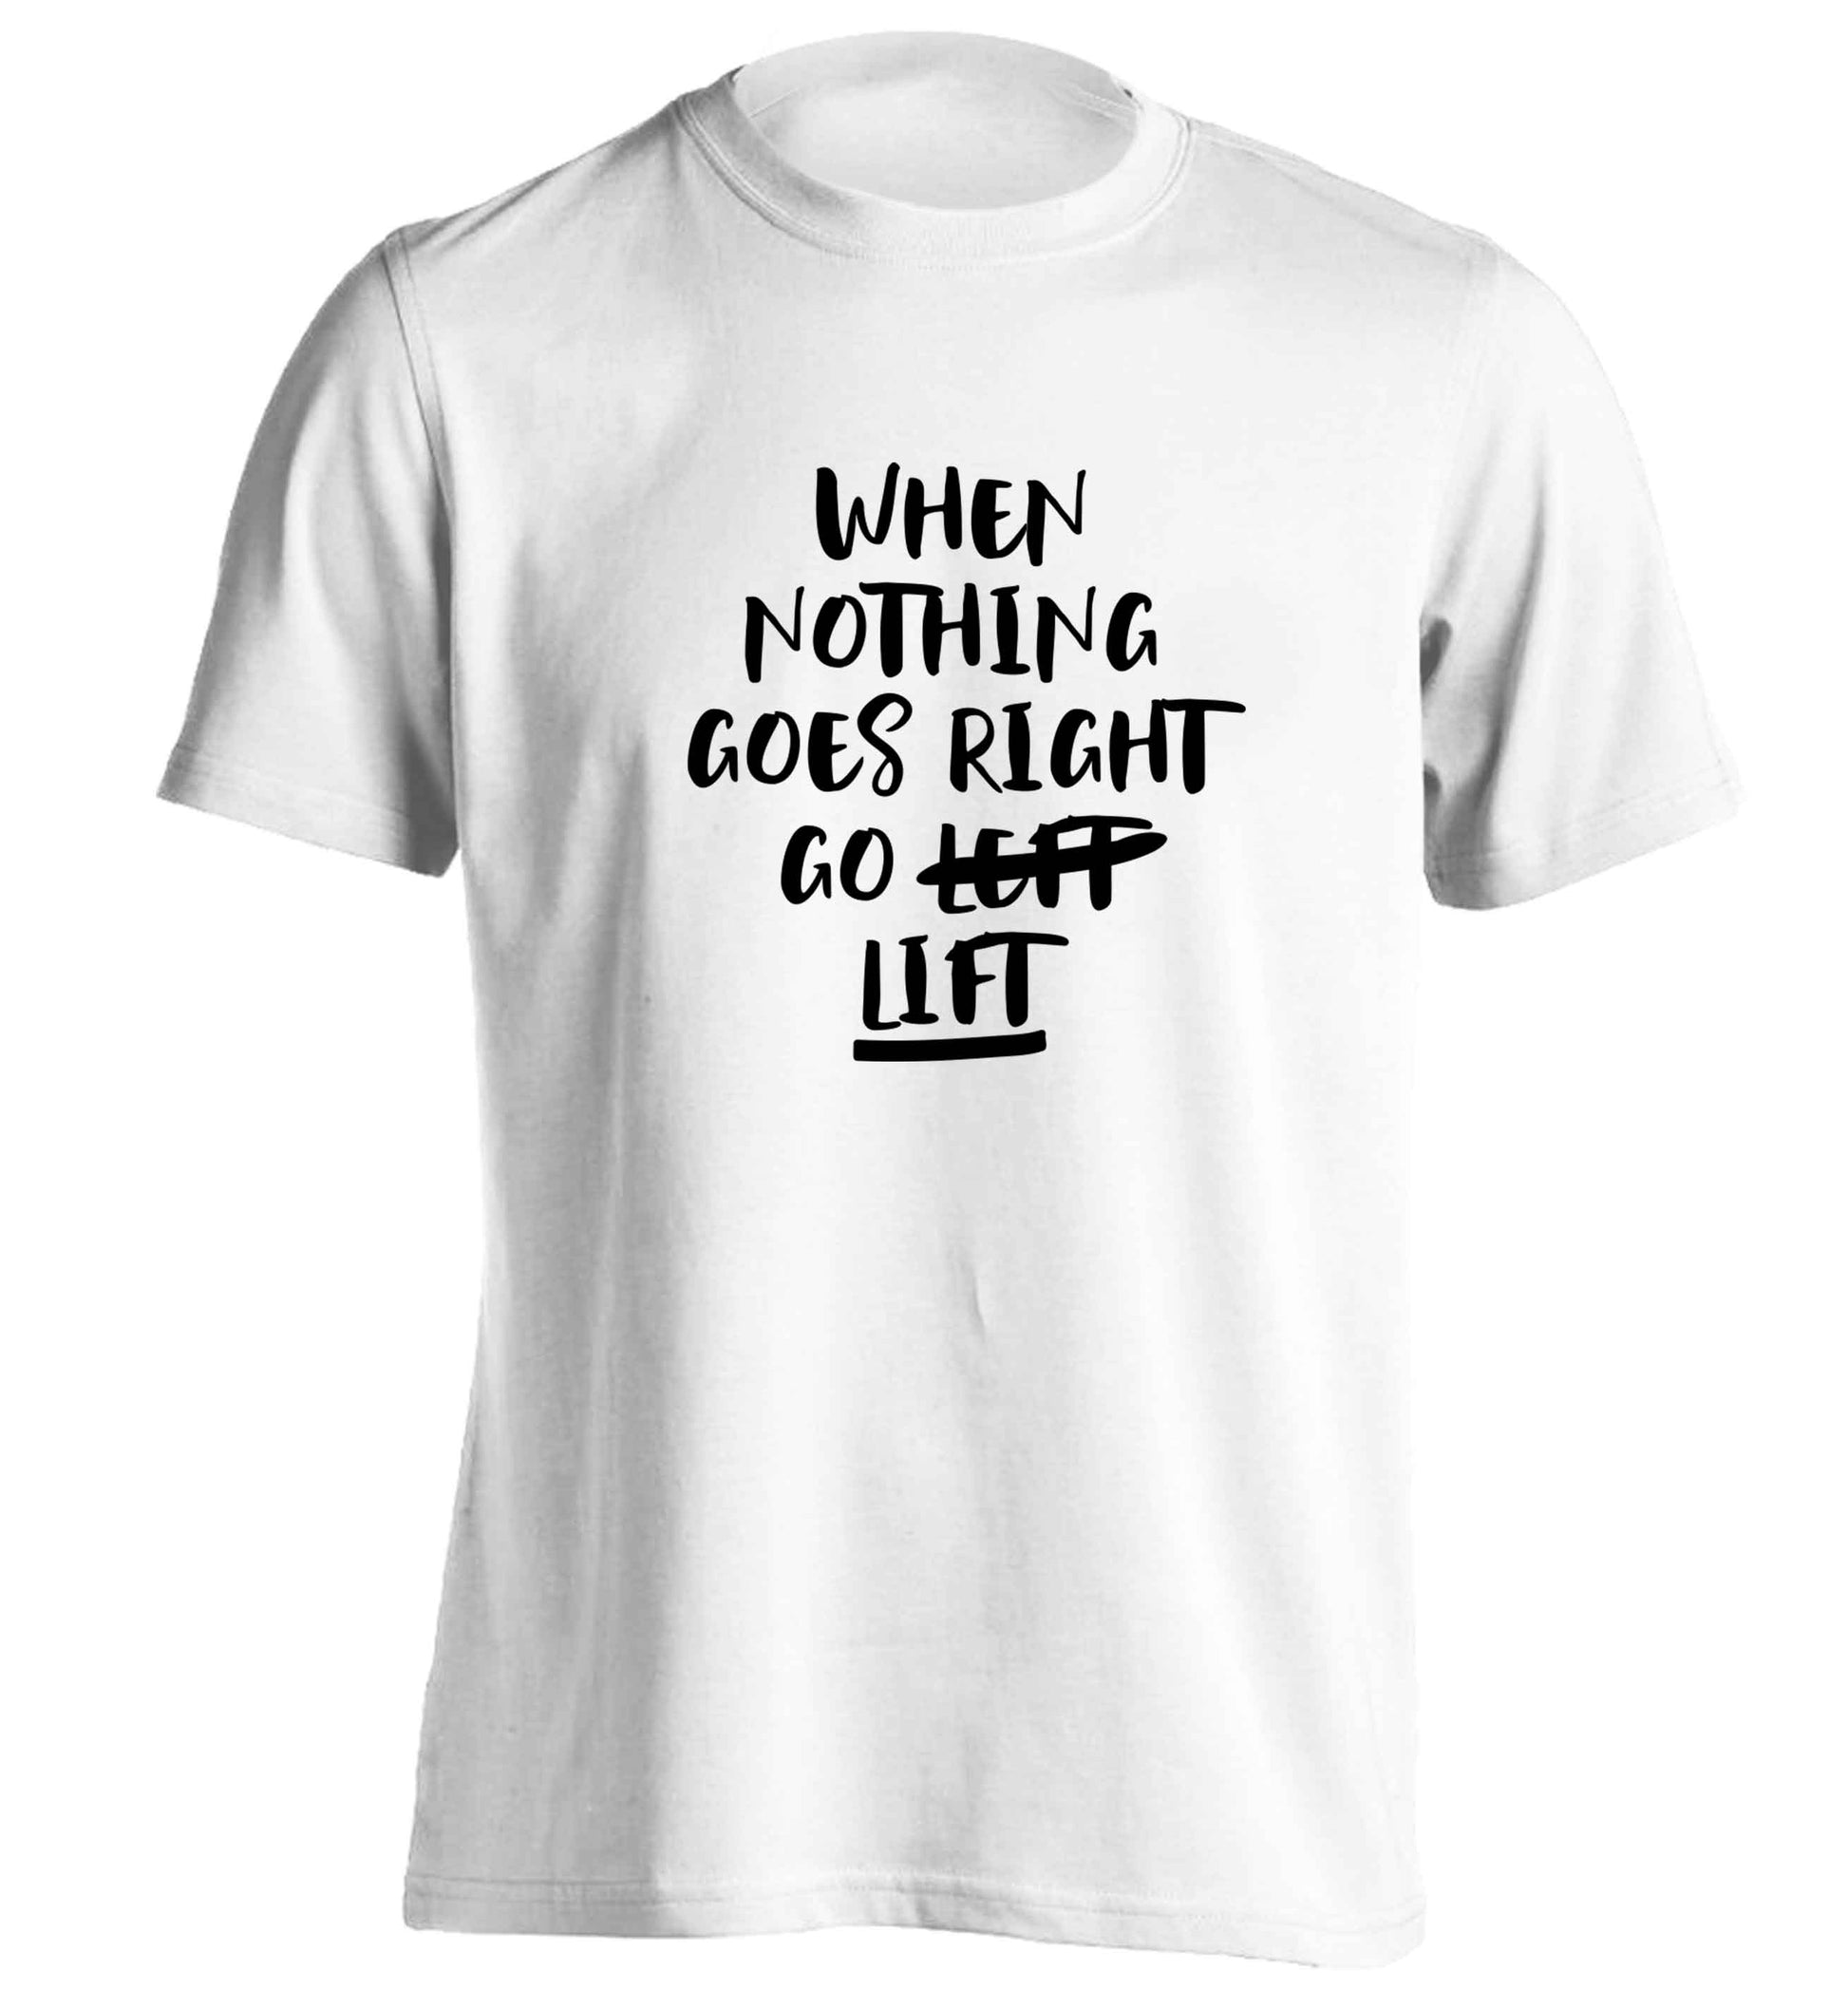 When nothing goes right go lift adults unisex white Tshirt 2XL